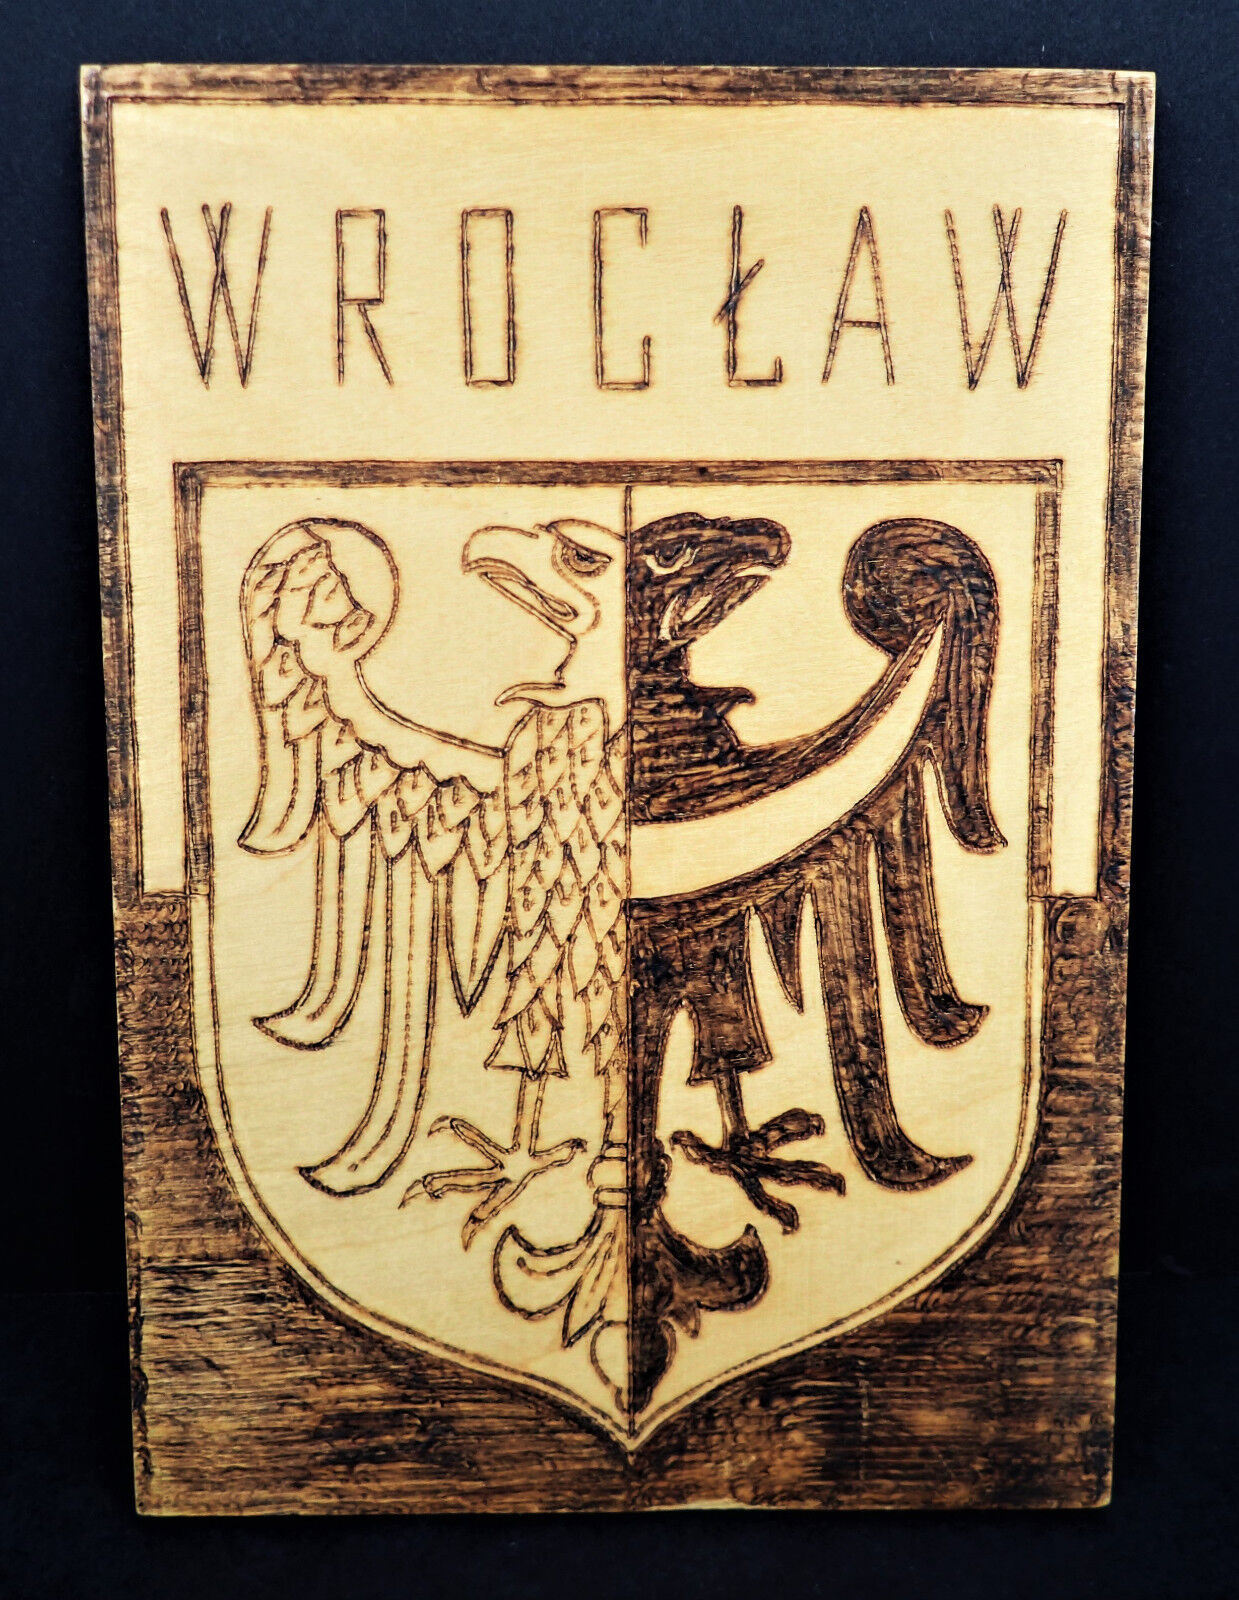 Wroclaw Eagle Crest Wooden Picture Warsaw Poland Heraldic Sheild Coat of Arms 